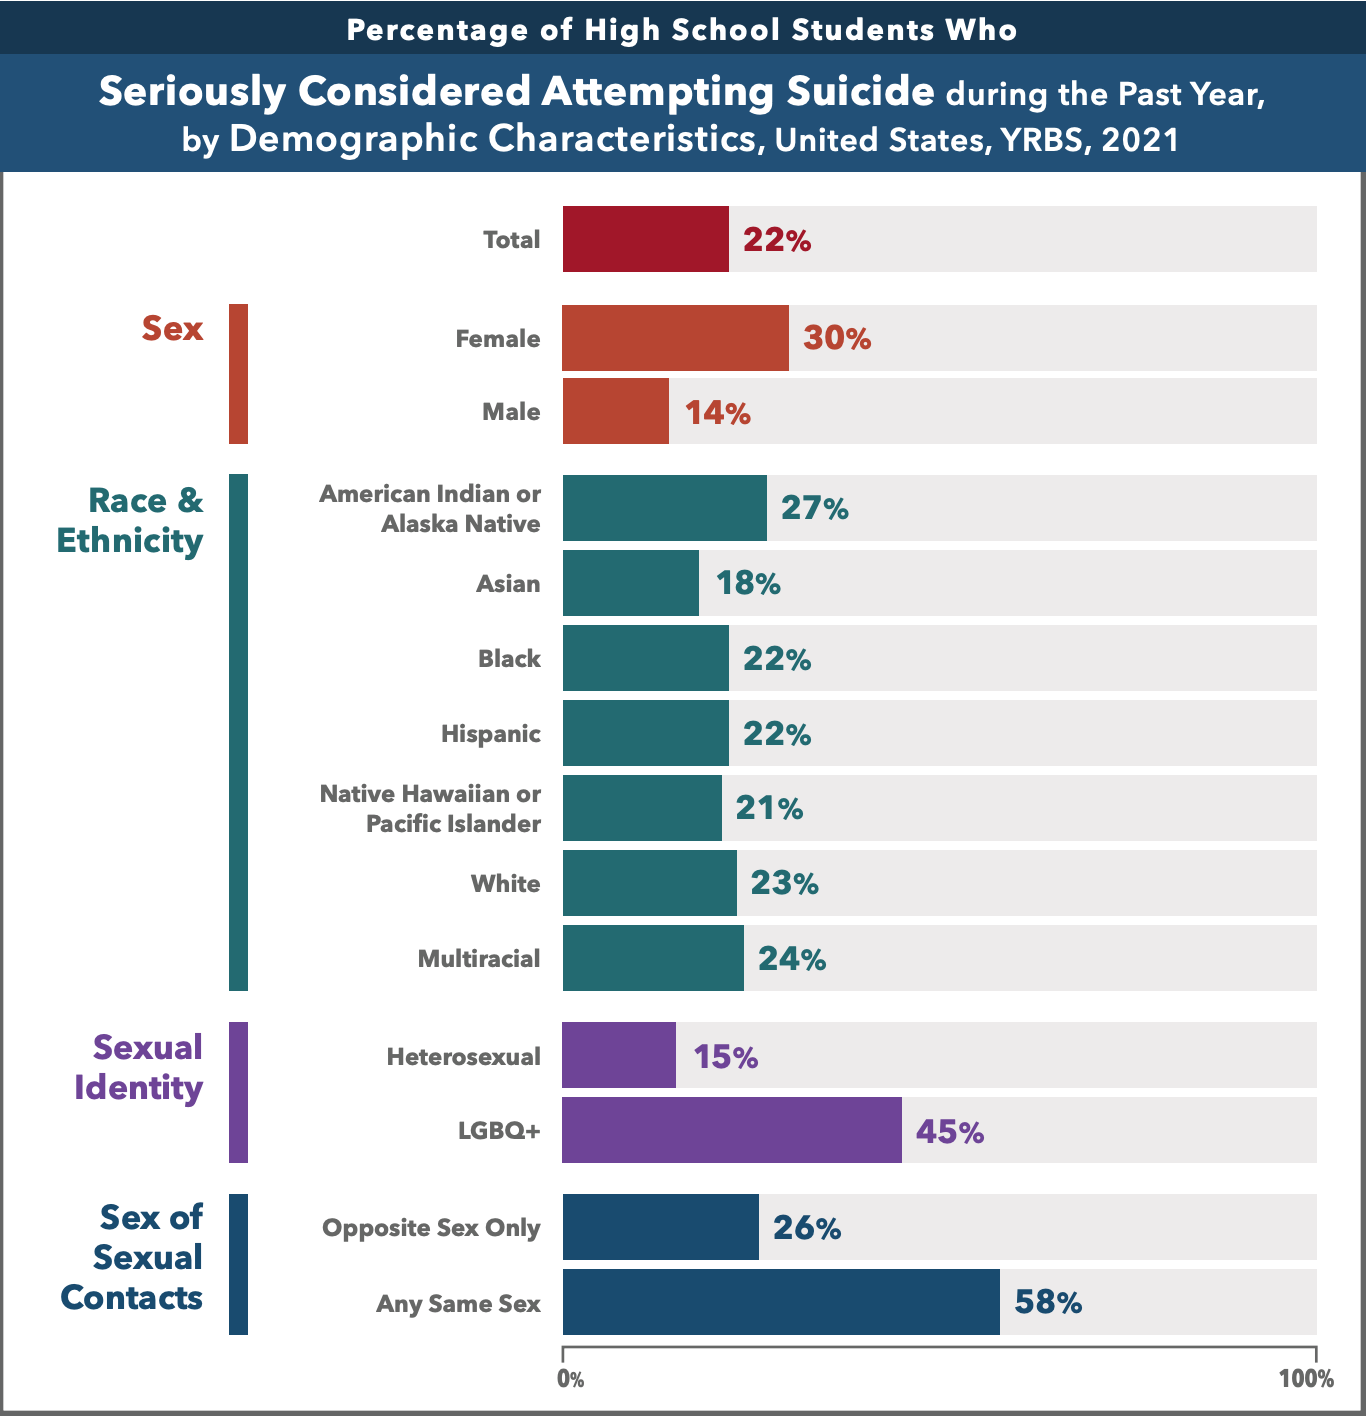 YRBS 2021 School Survey Chart of high school students who seriously considered attempting suicide during the past year by sexual identity